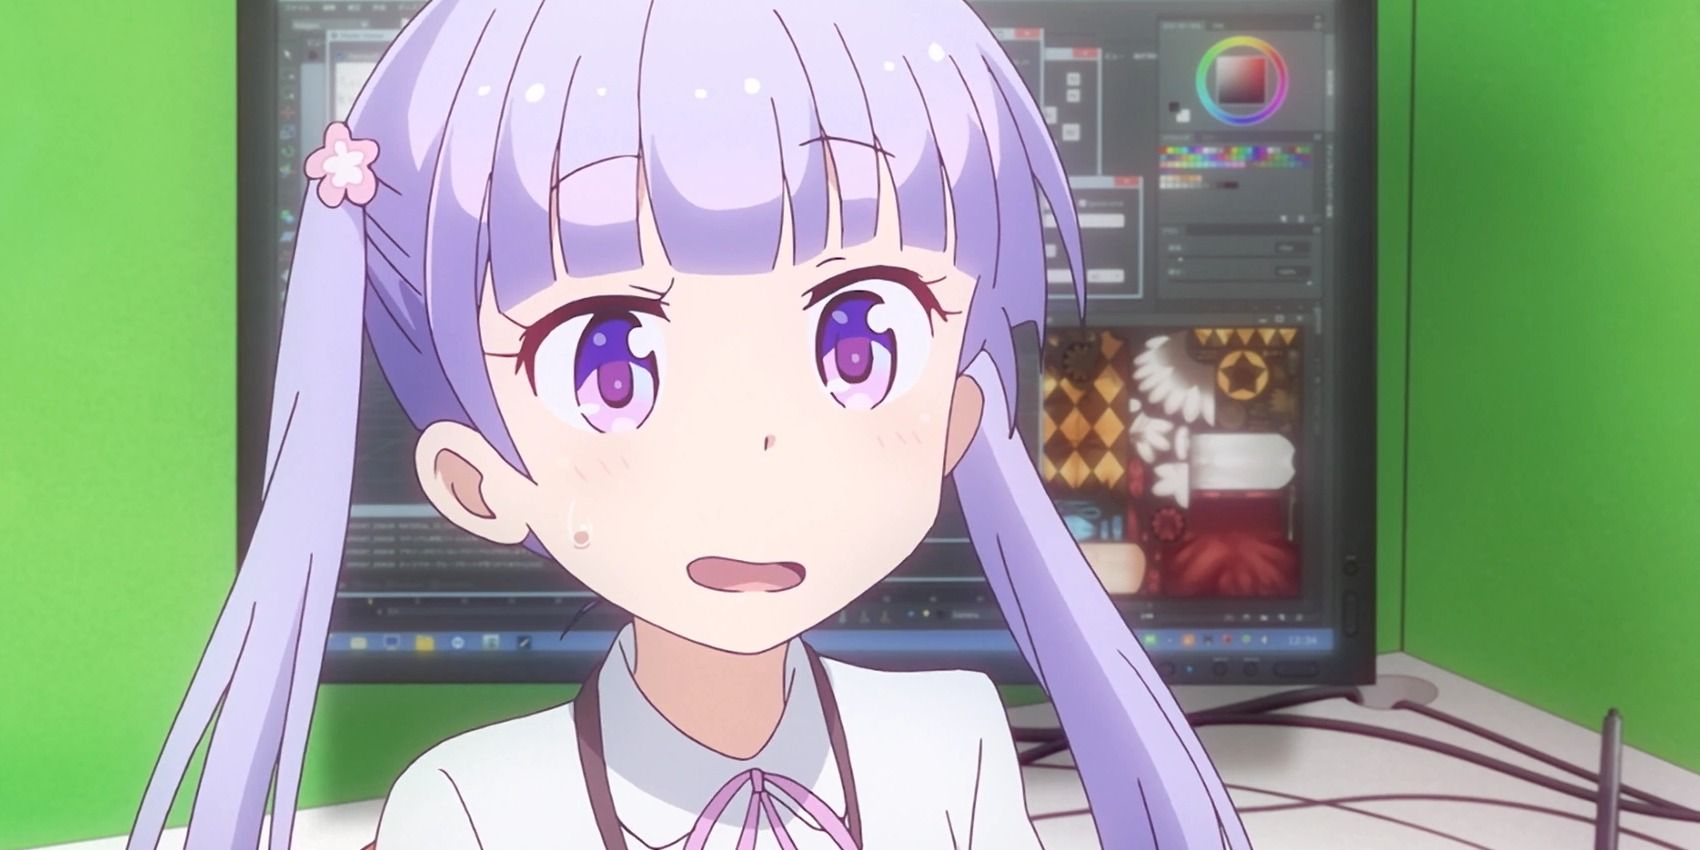 the character aoba suzukaze from the anime new game